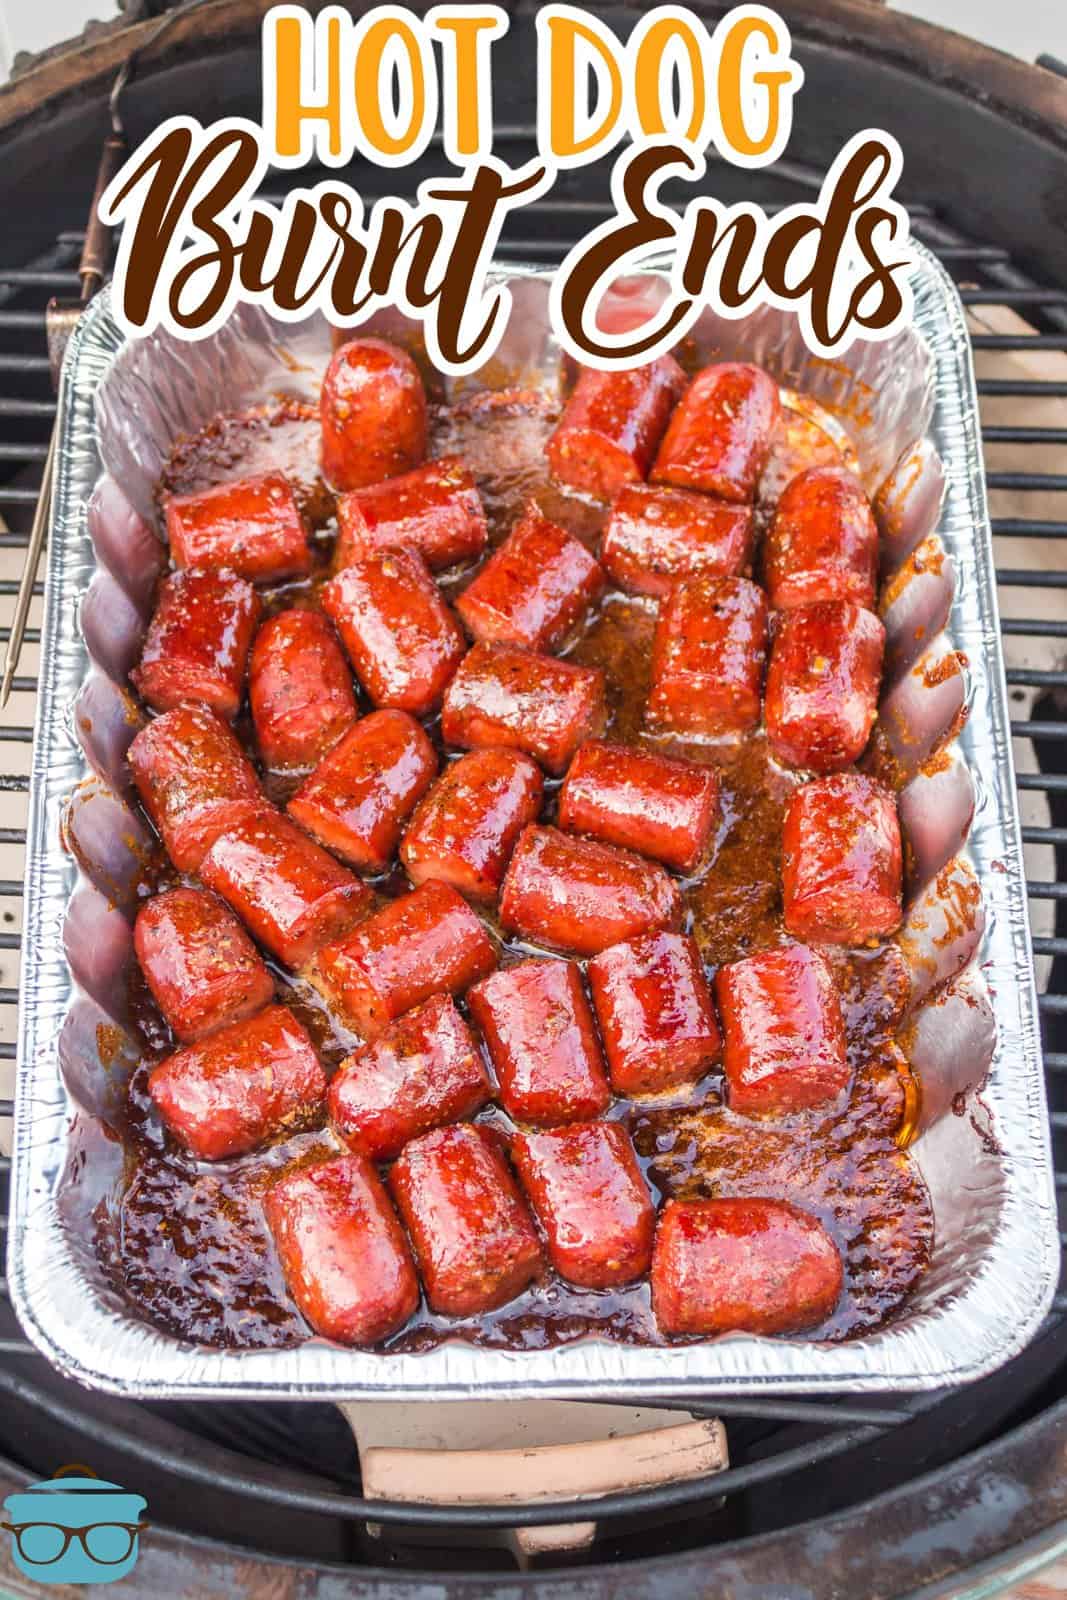 An aluminum tray of Smoked Hot Dog Burnt Ends.